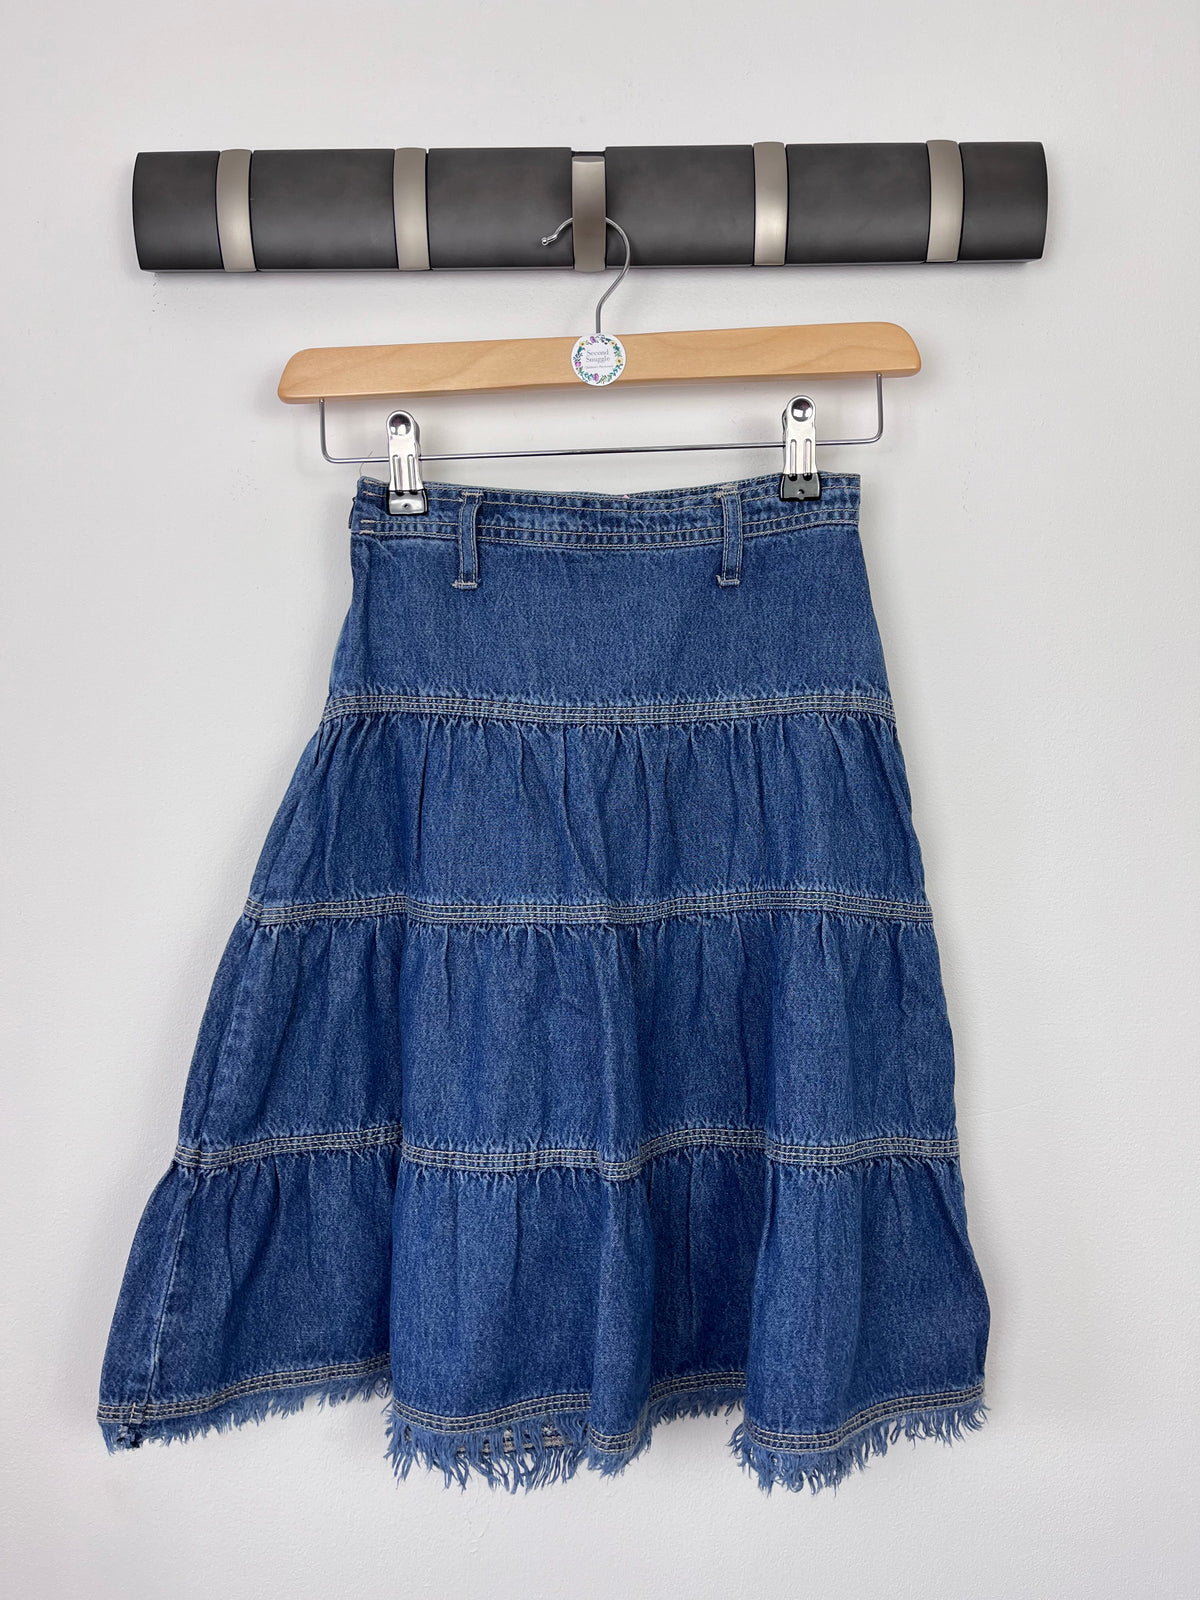 Unbranded 8-9 Years-Skirts-Second Snuggle Preloved